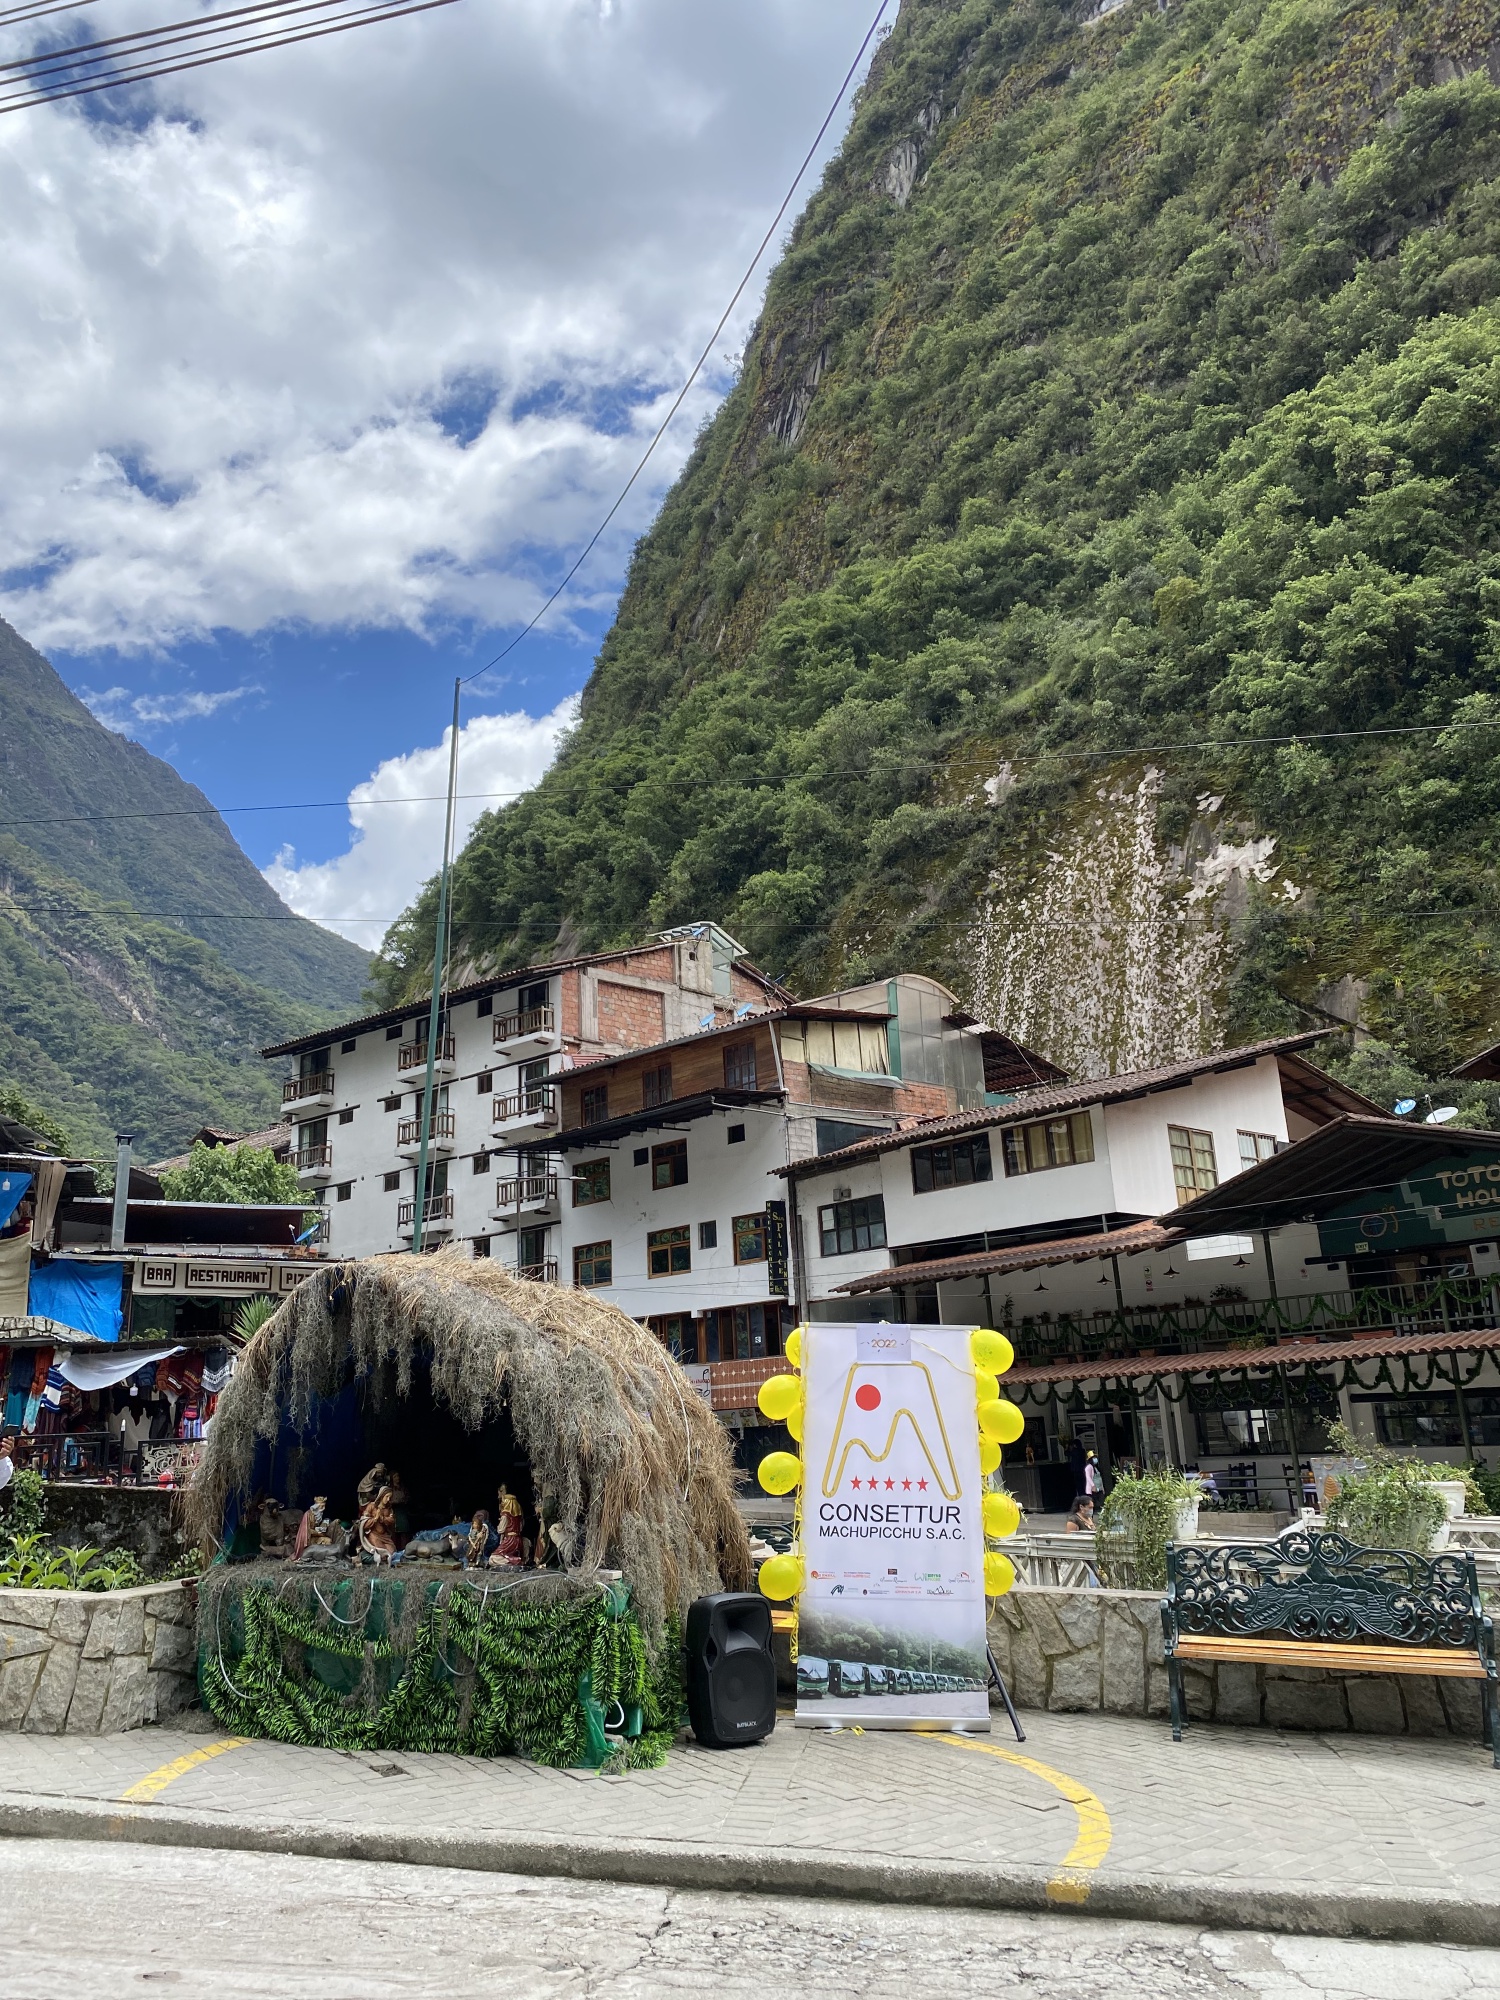 Aguas Calientes is a small town we didn't get to explore much of, but there were a lot of hostels to stay in if you fancy a longer trip here